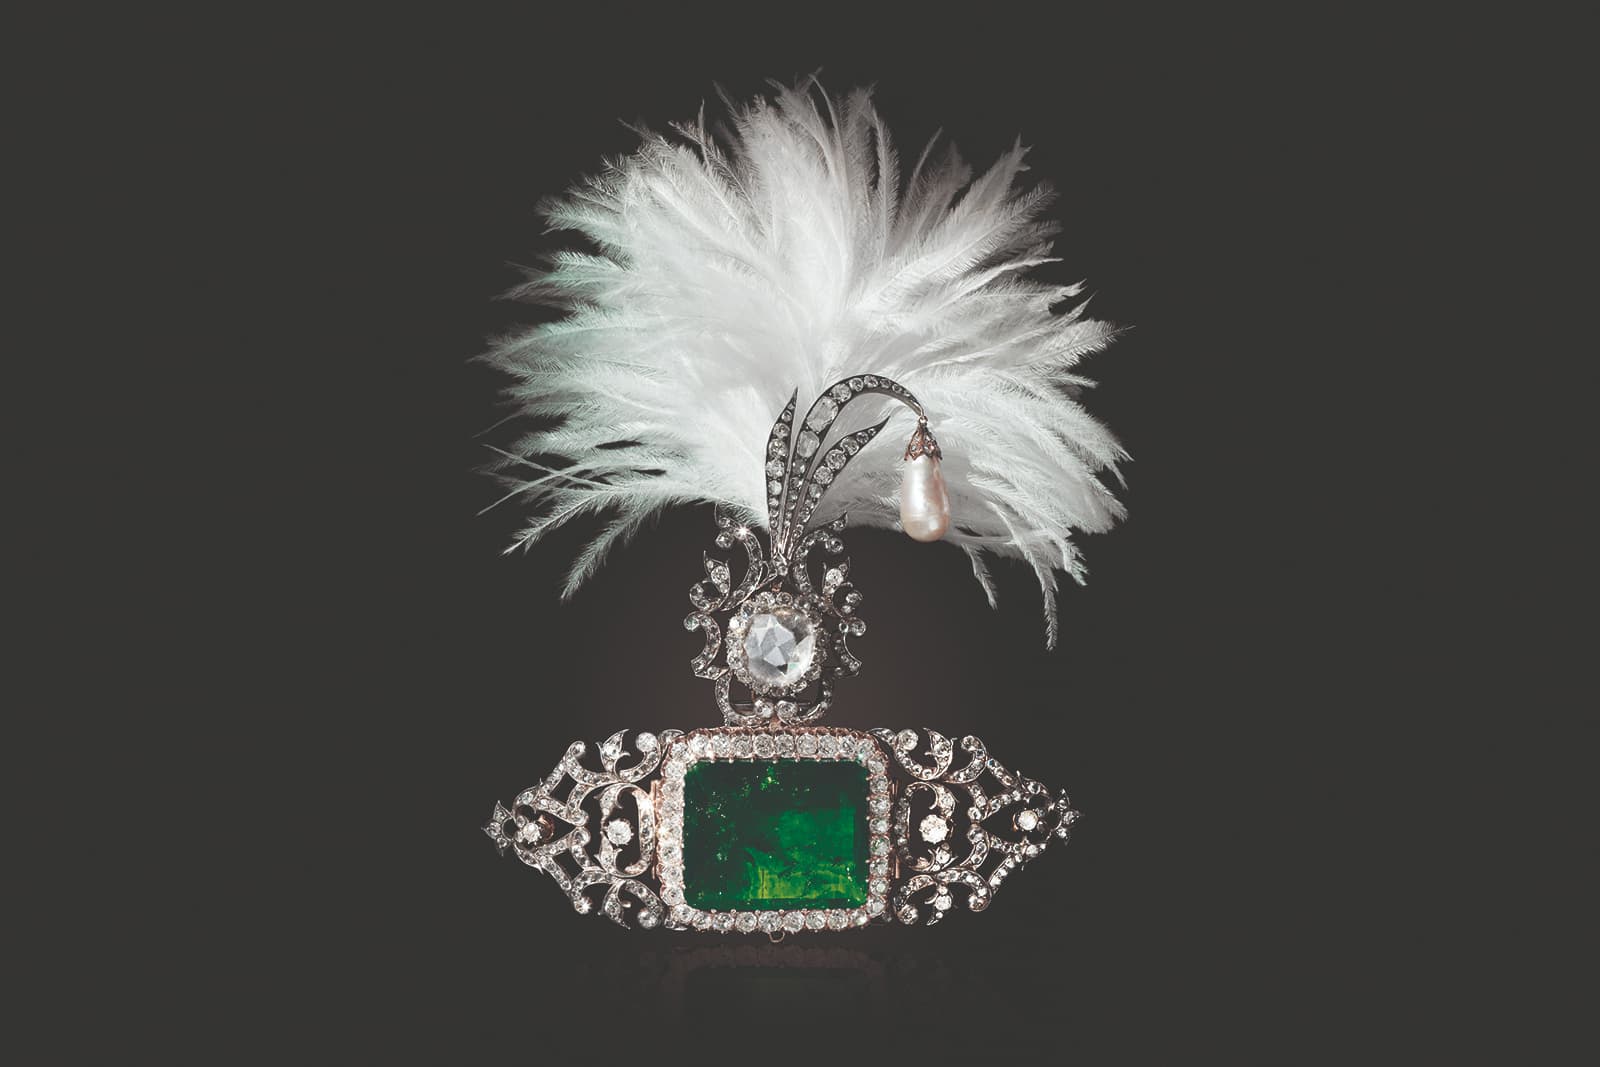 Christie’s ‘Maharajas & Mughal Magnificence’ sarpech adapted by Cartier, with emerald, pearl and diamonds